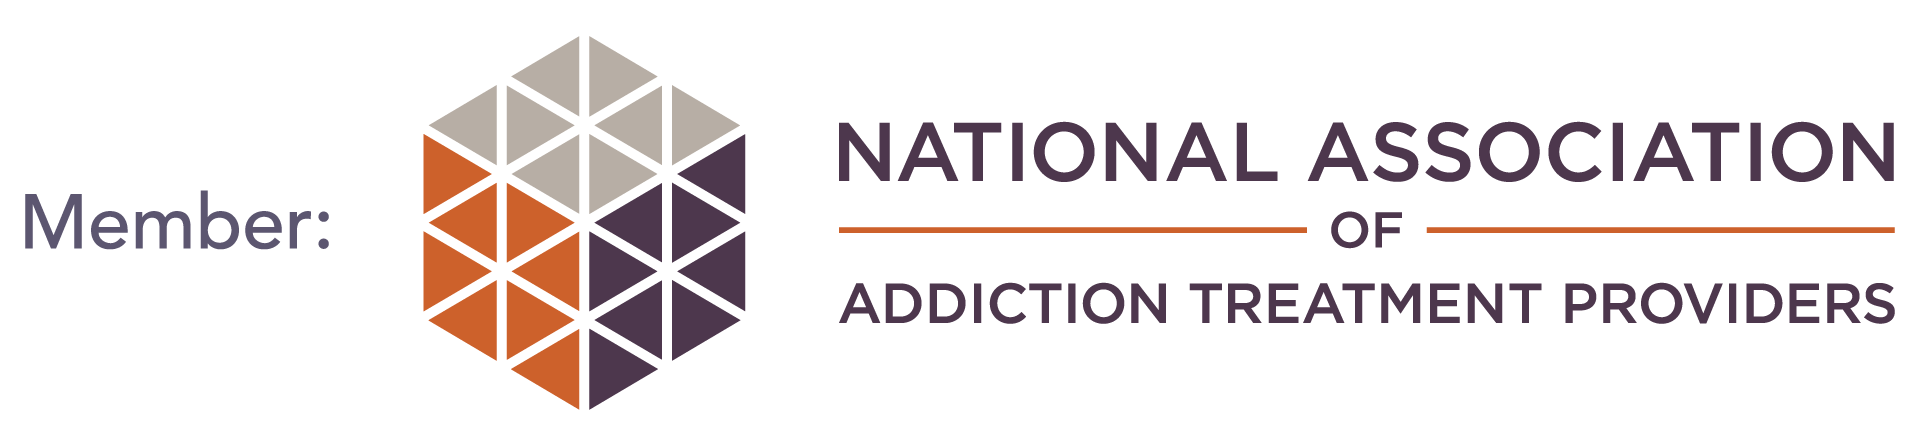 We Level Up addiction treatment center is a NAATP member.  We Level Up is committed to the Highest Level of Quality Addiction Treatment Care.